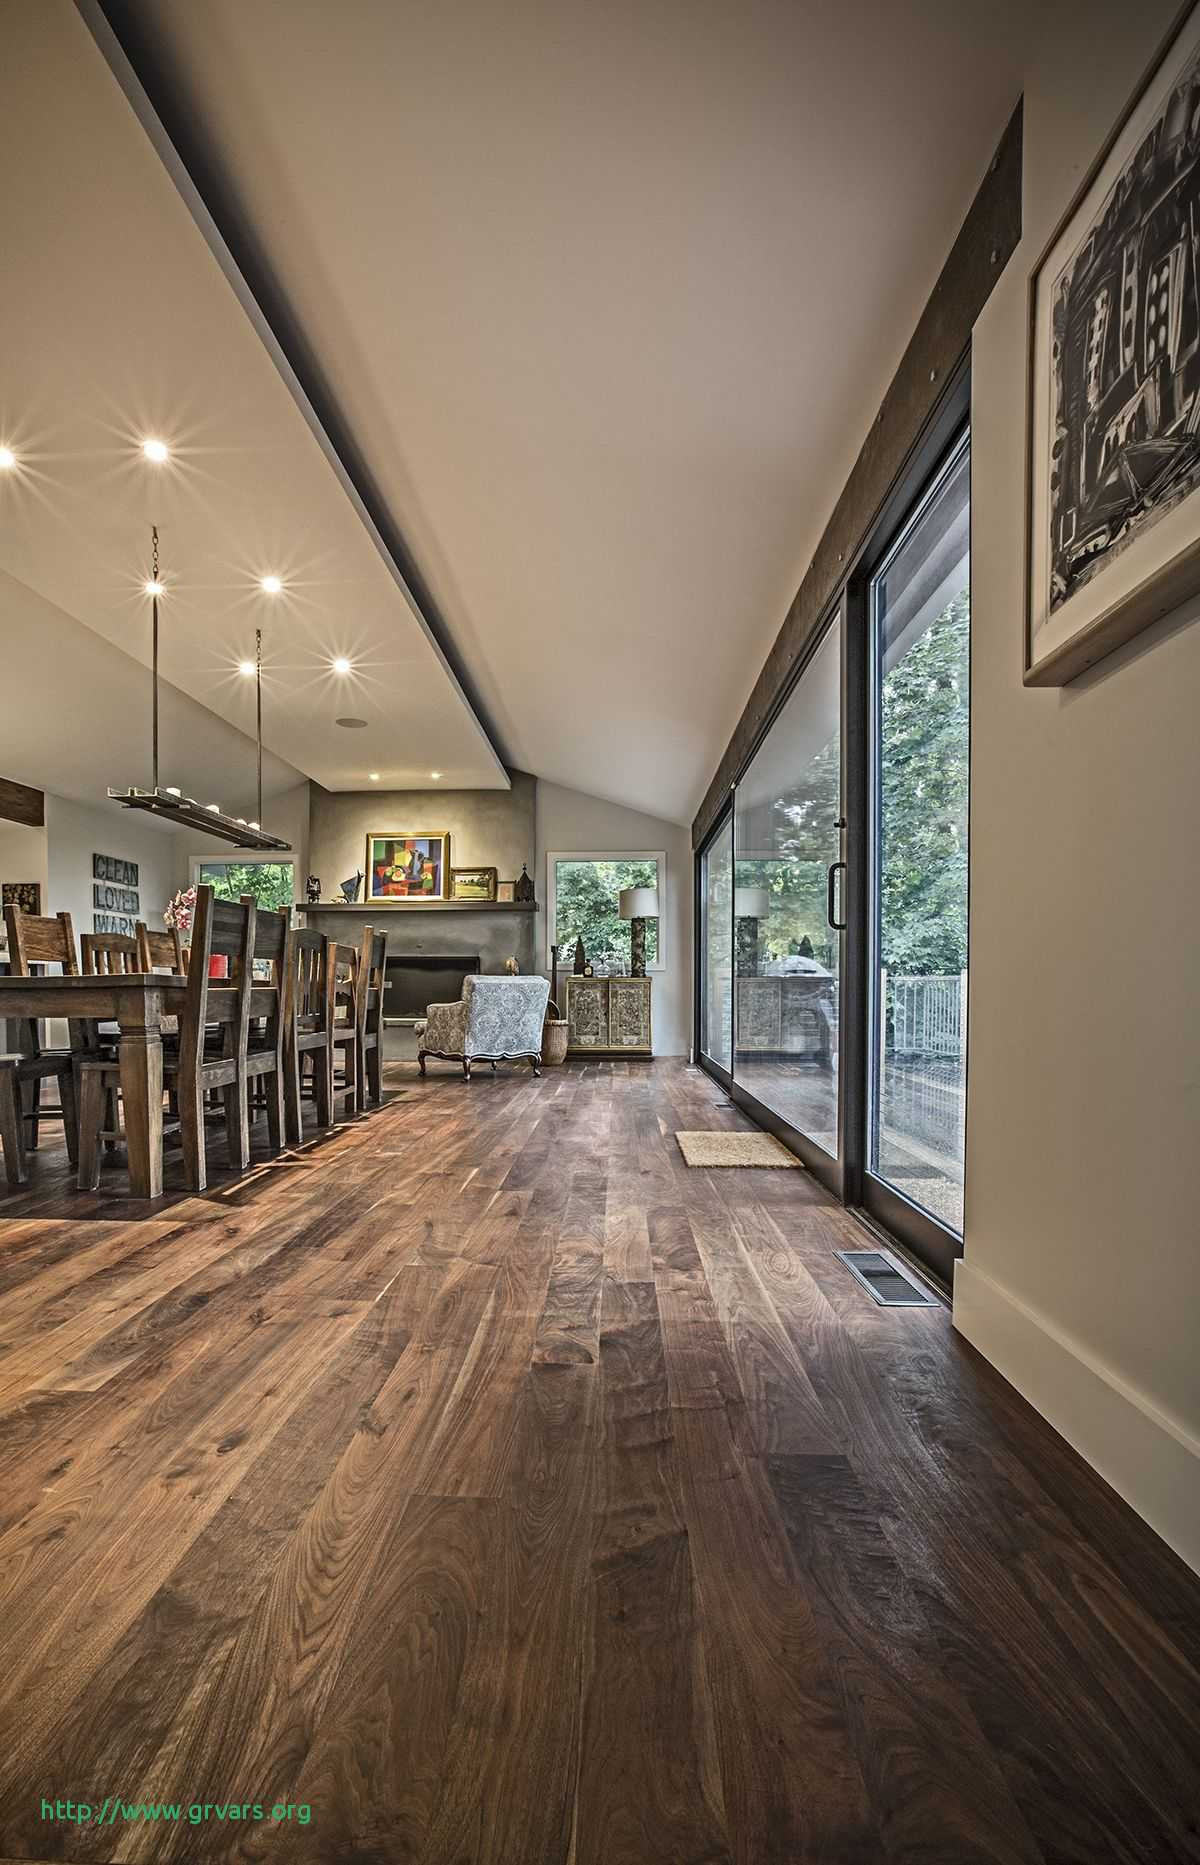 21 Stylish Walnut Hardwood Flooring Pros and Cons 2024 free download walnut hardwood flooring pros and cons of natural way to shine wood floors luxe the pros and cons of in natural way to shine wood floors luxe pretty walnut flooring no shiny coating